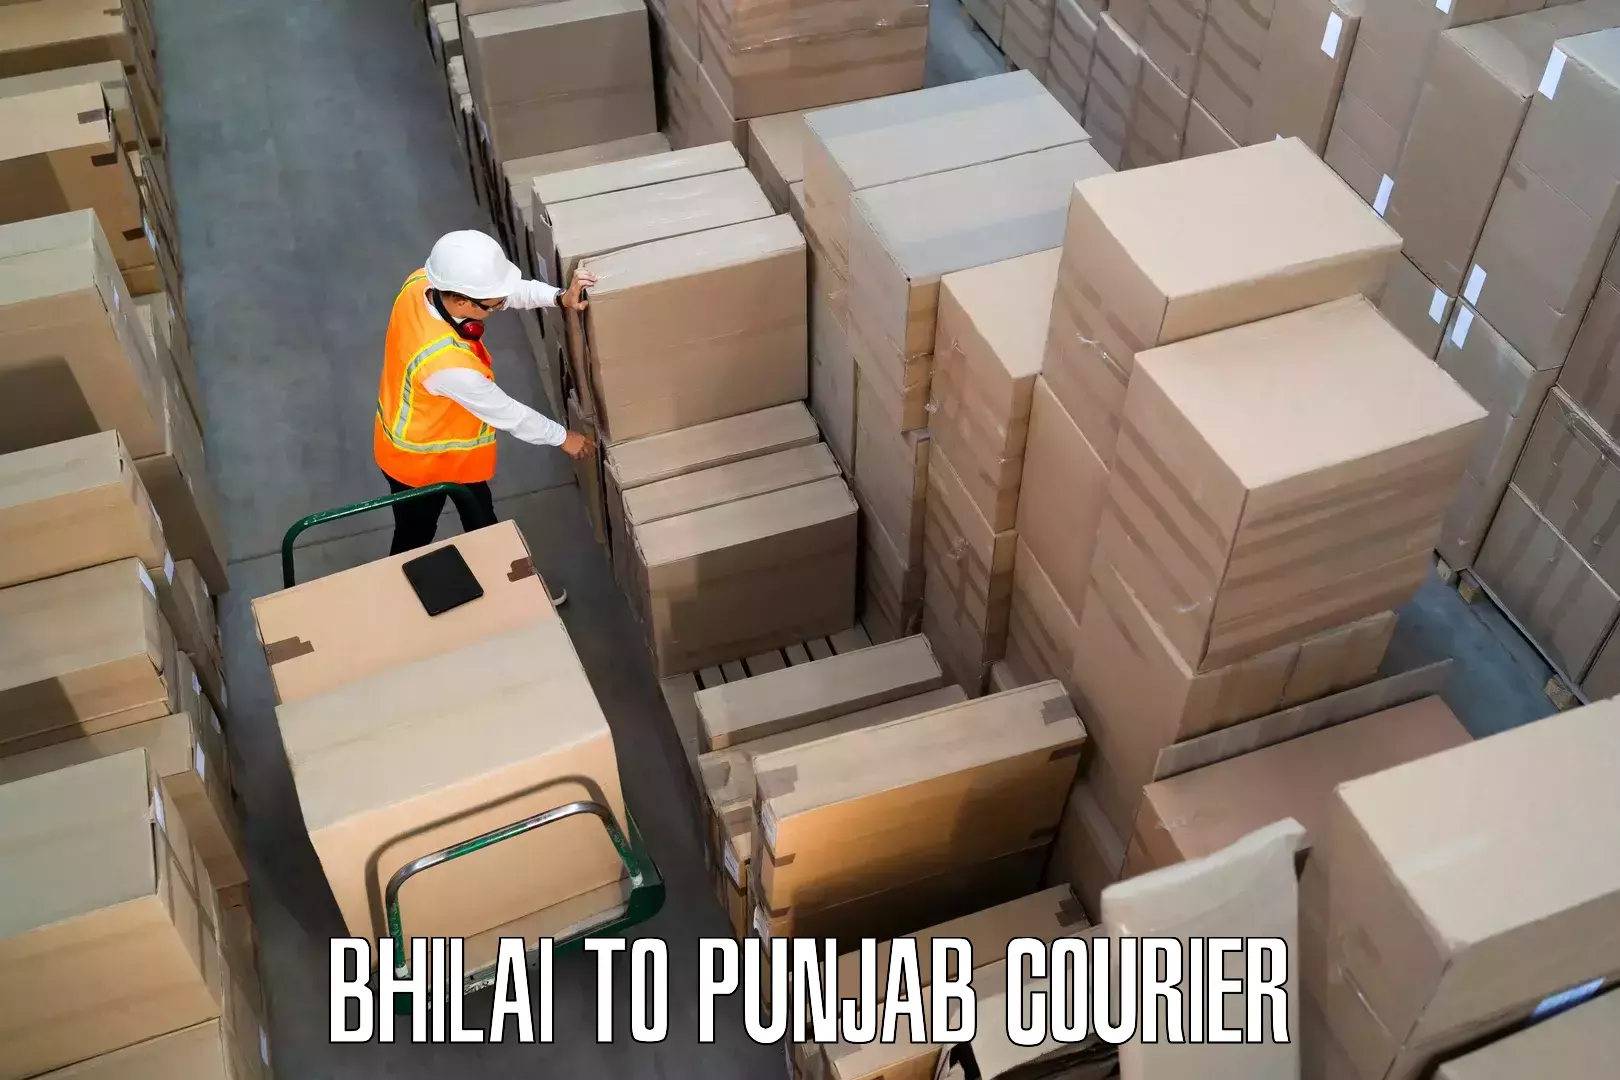 Furniture relocation experts Bhilai to Amritsar